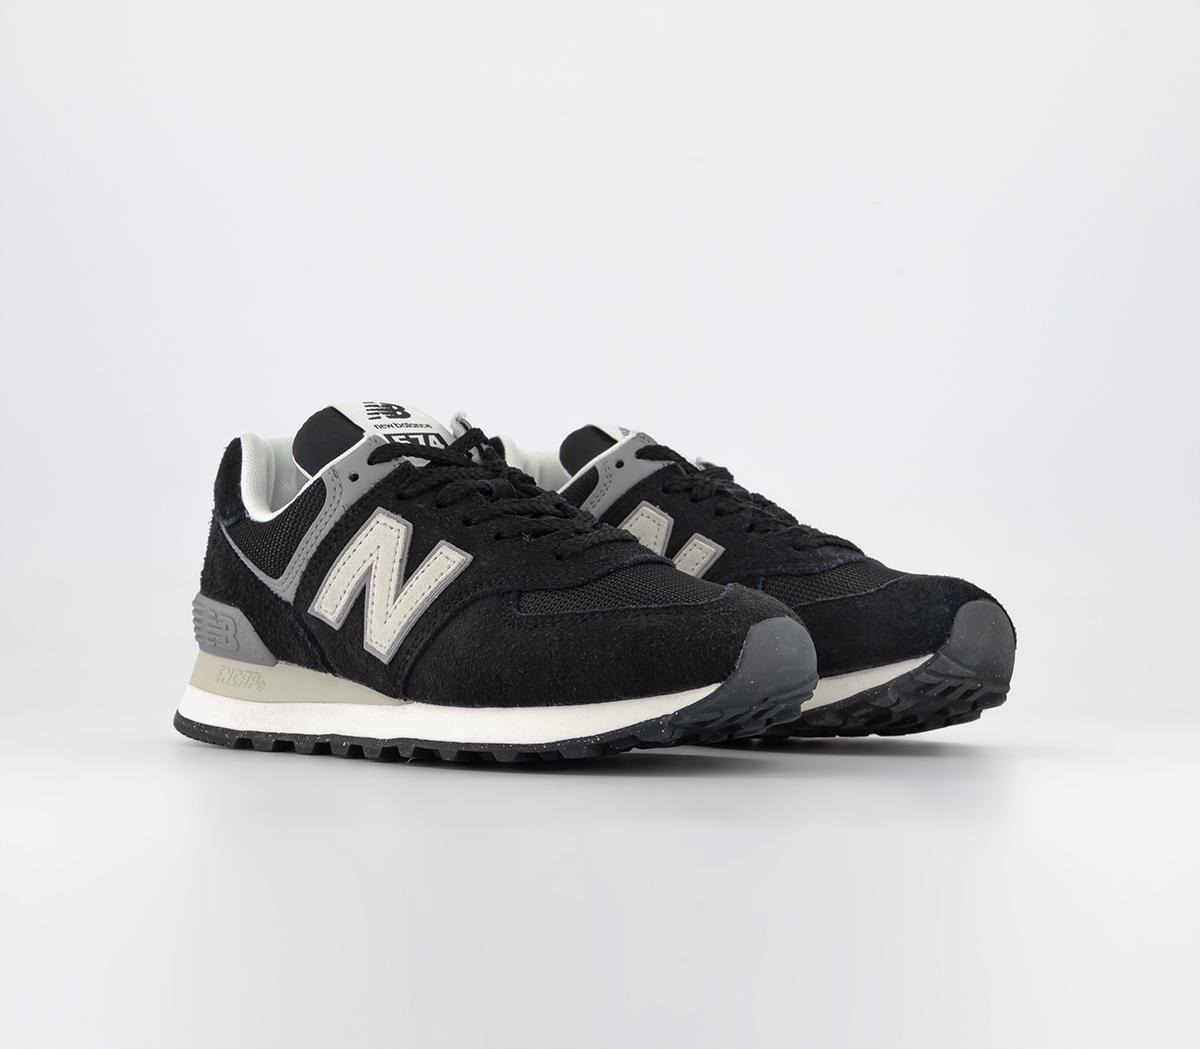 New Balance 574 Trainers Black Silver Grey - Men's Trainers